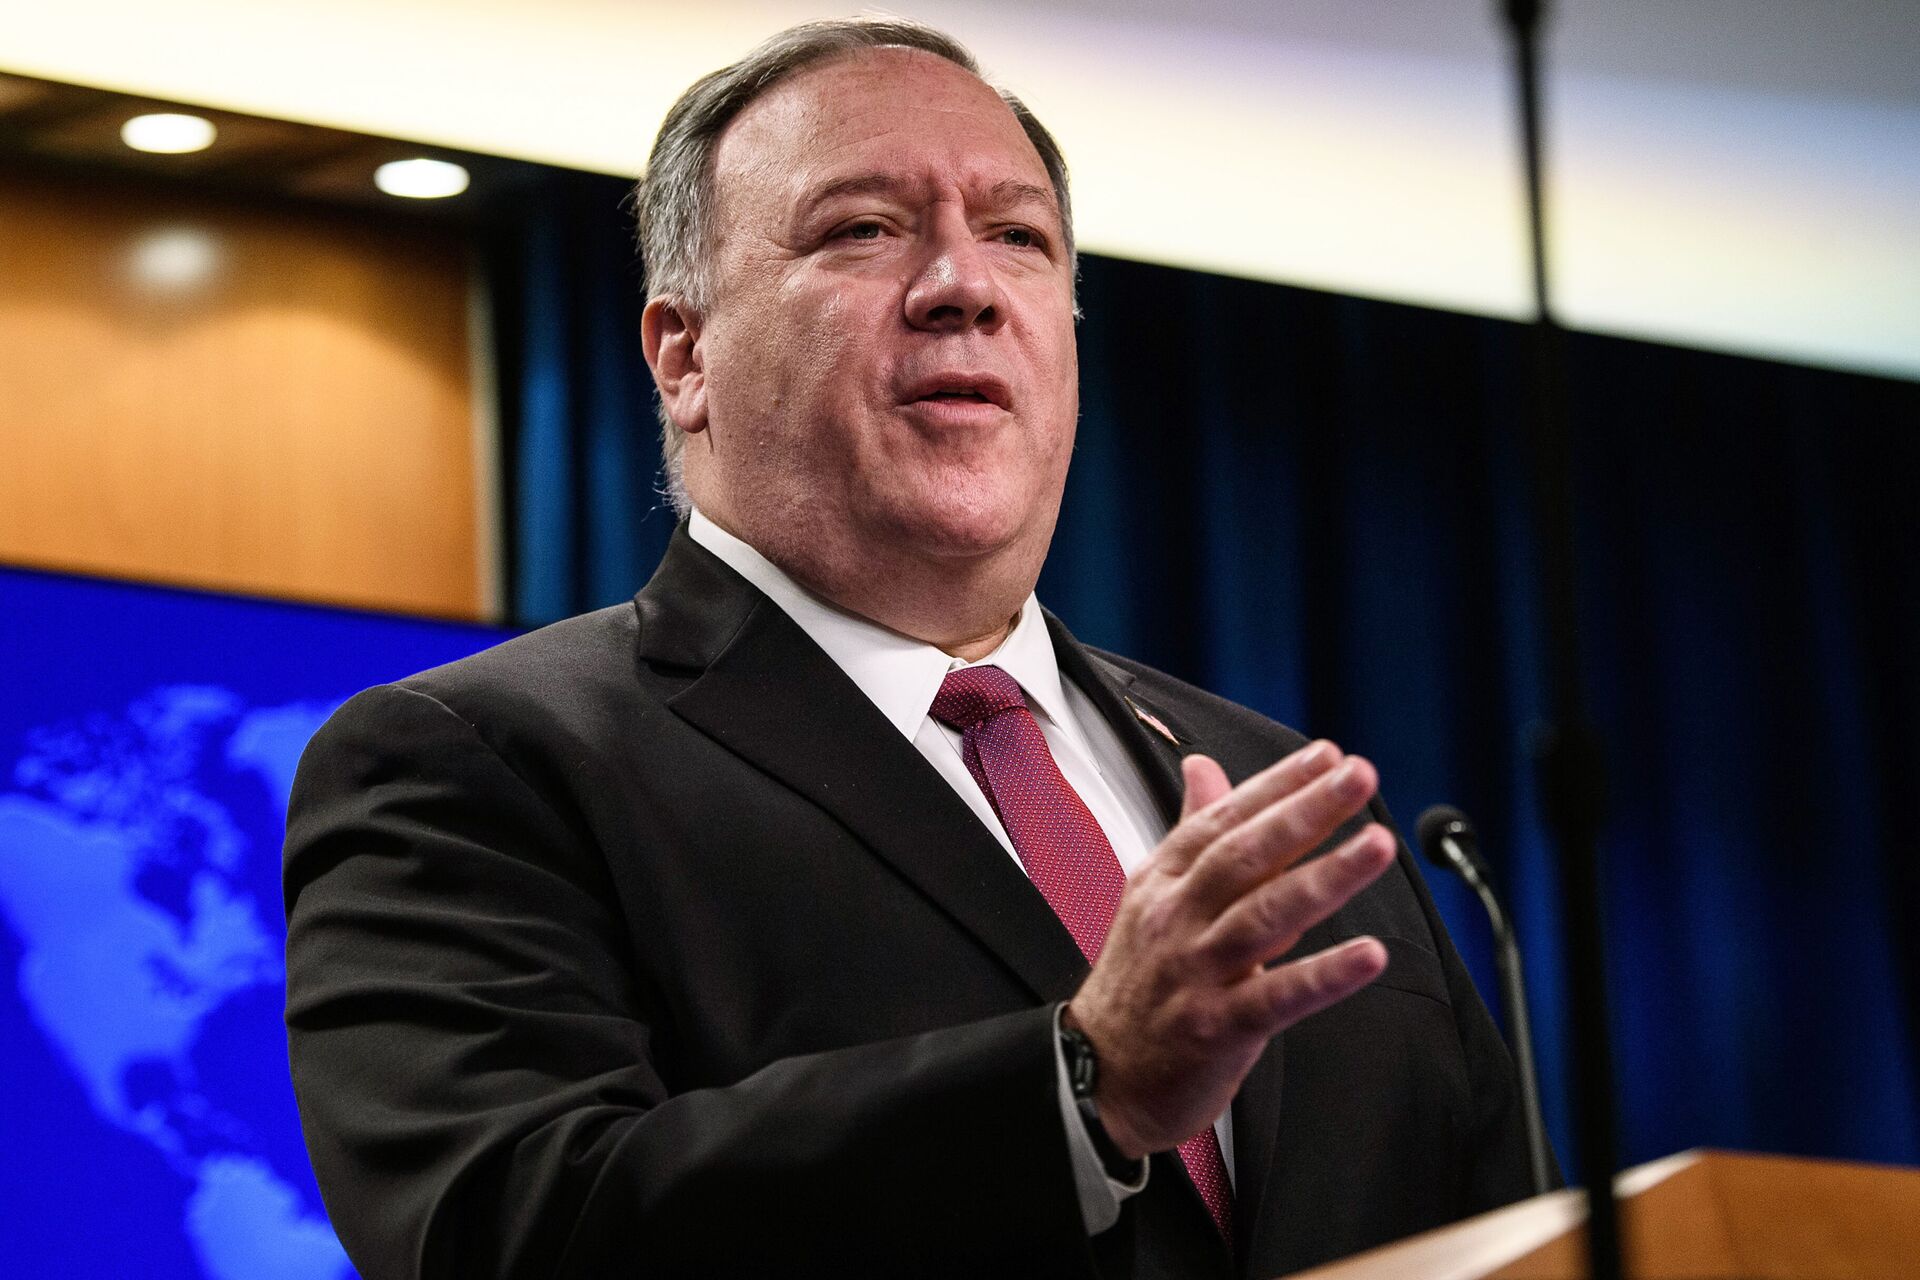 Frontrunner or Outsider: What May the Future Hold for Mike Pompeo if He Runs for Presidency in 2024? - Sputnik International, 1920, 24.04.2021